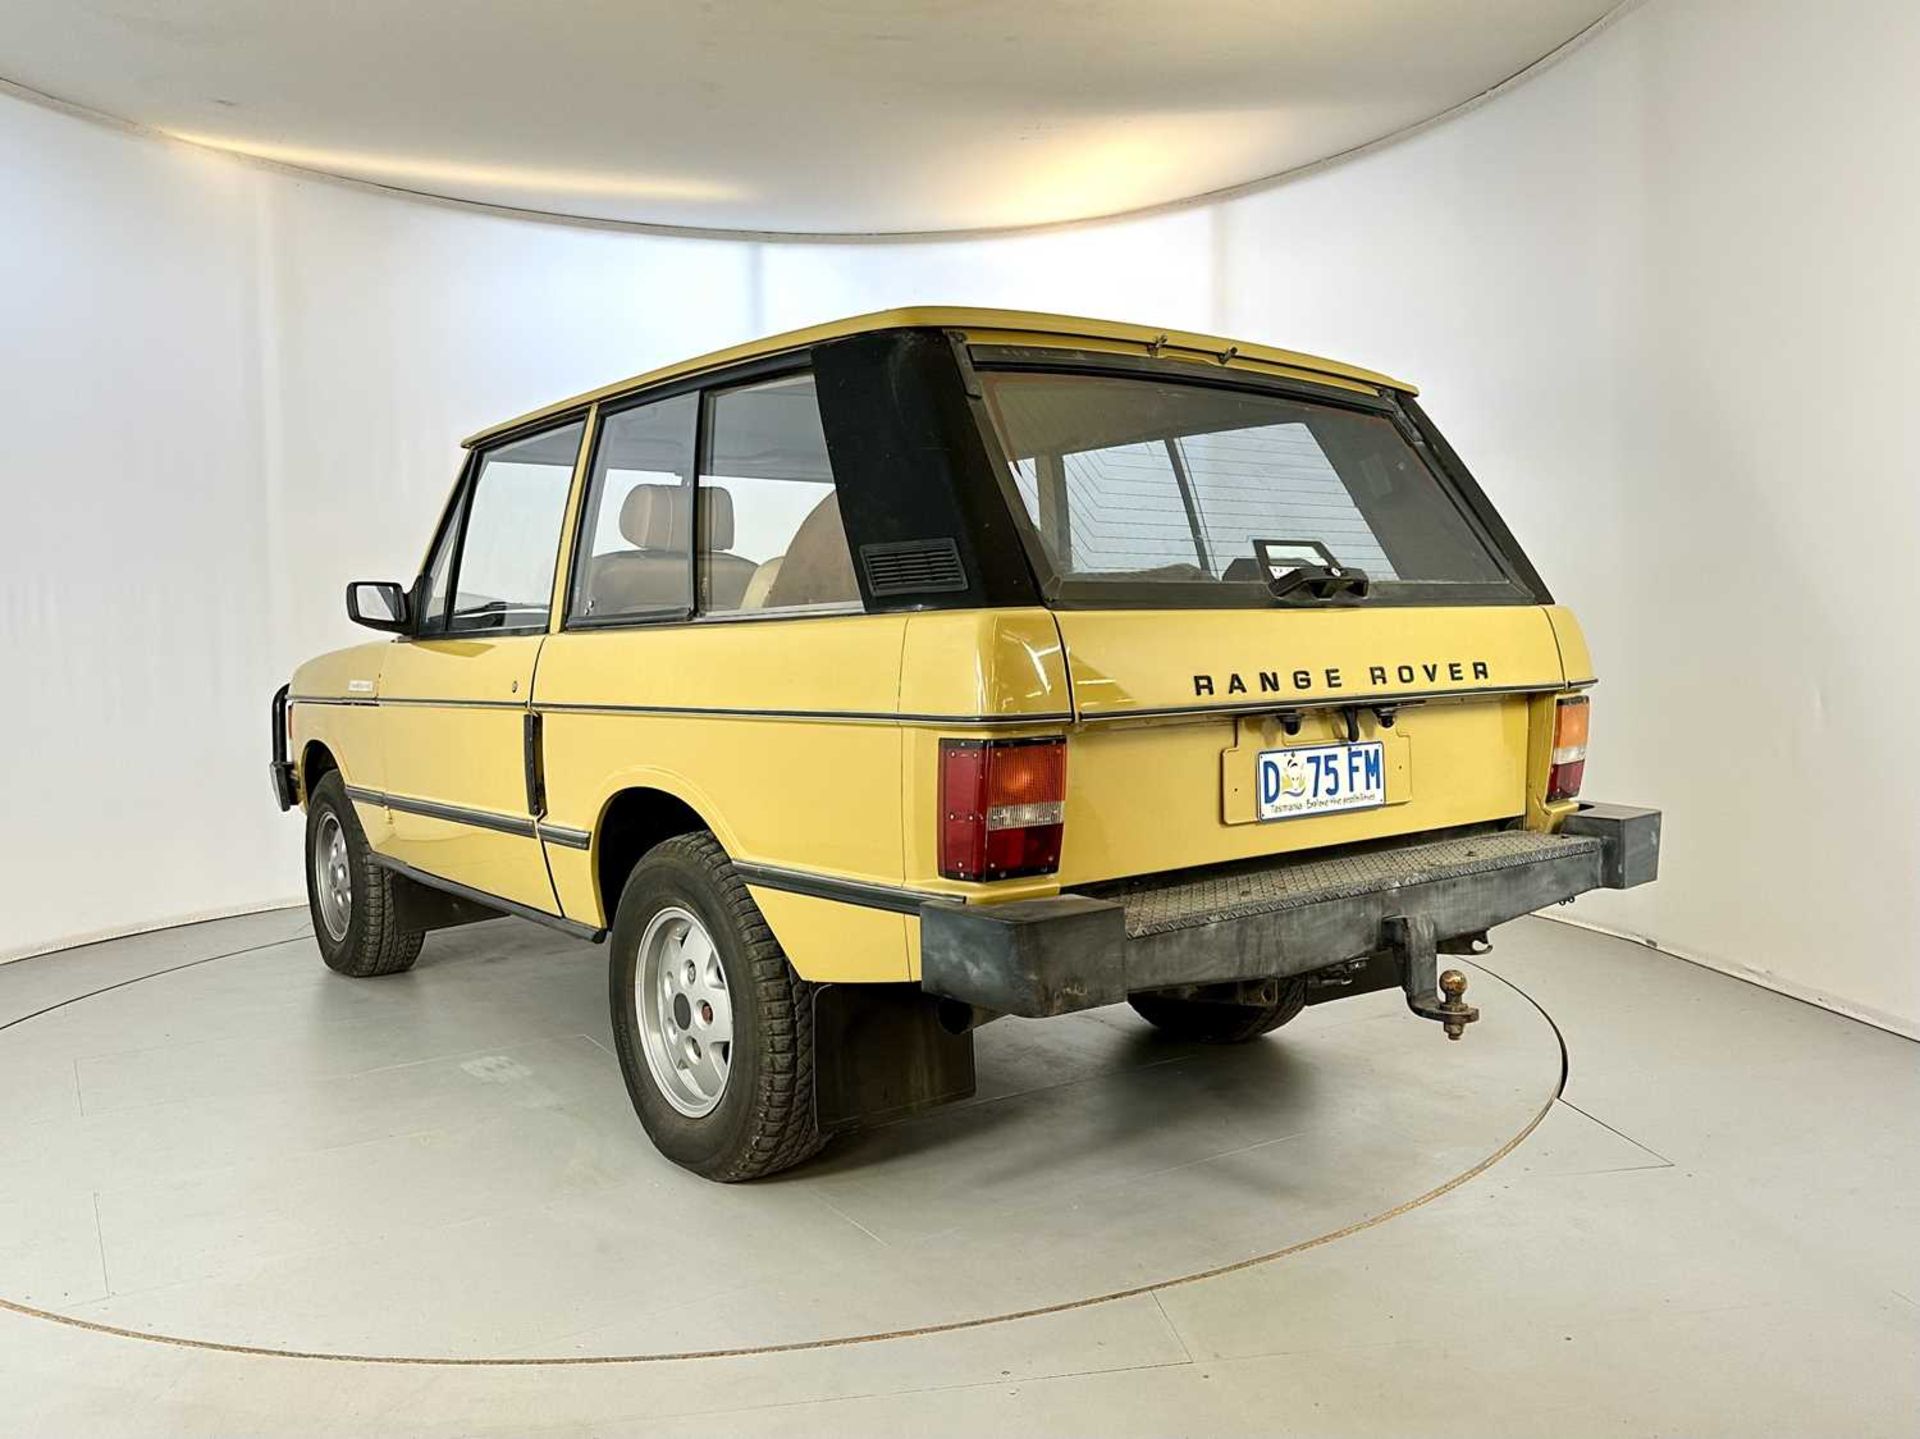 1974 Land Rover Range Rover Showing 26,000 miles from new - Image 7 of 29